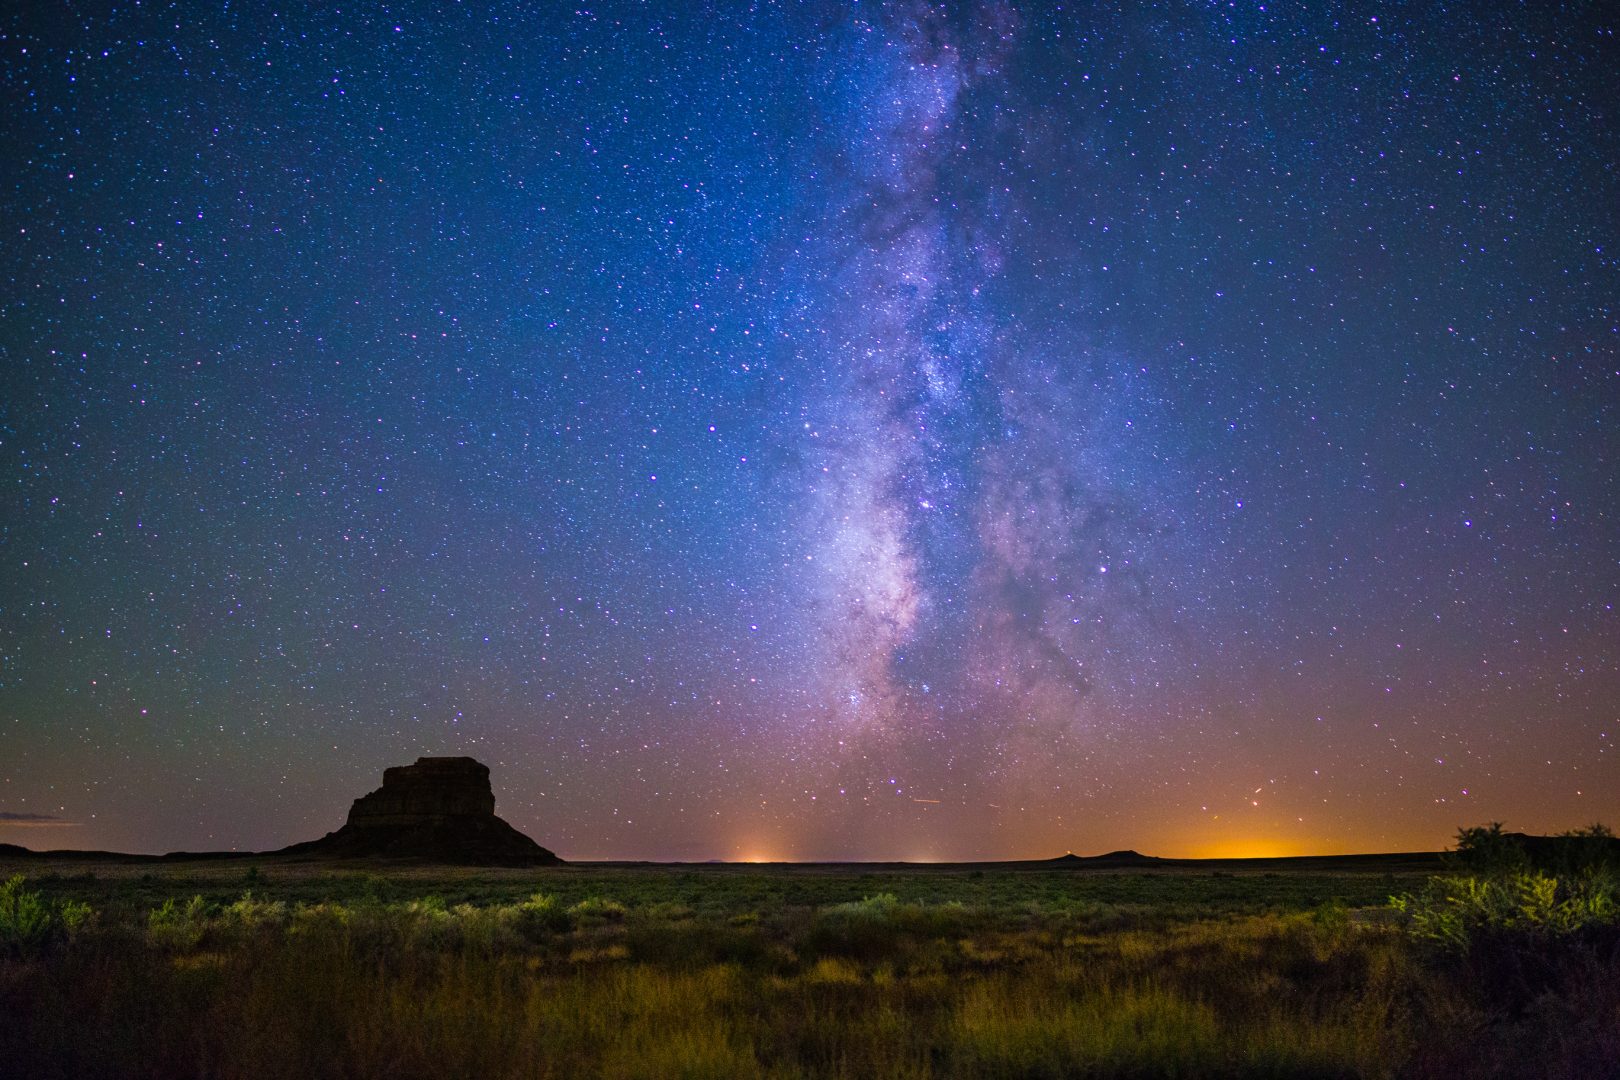 The Milky Way rises above Fajada Butte in Chaco Culture National Historical Park, New Mexico